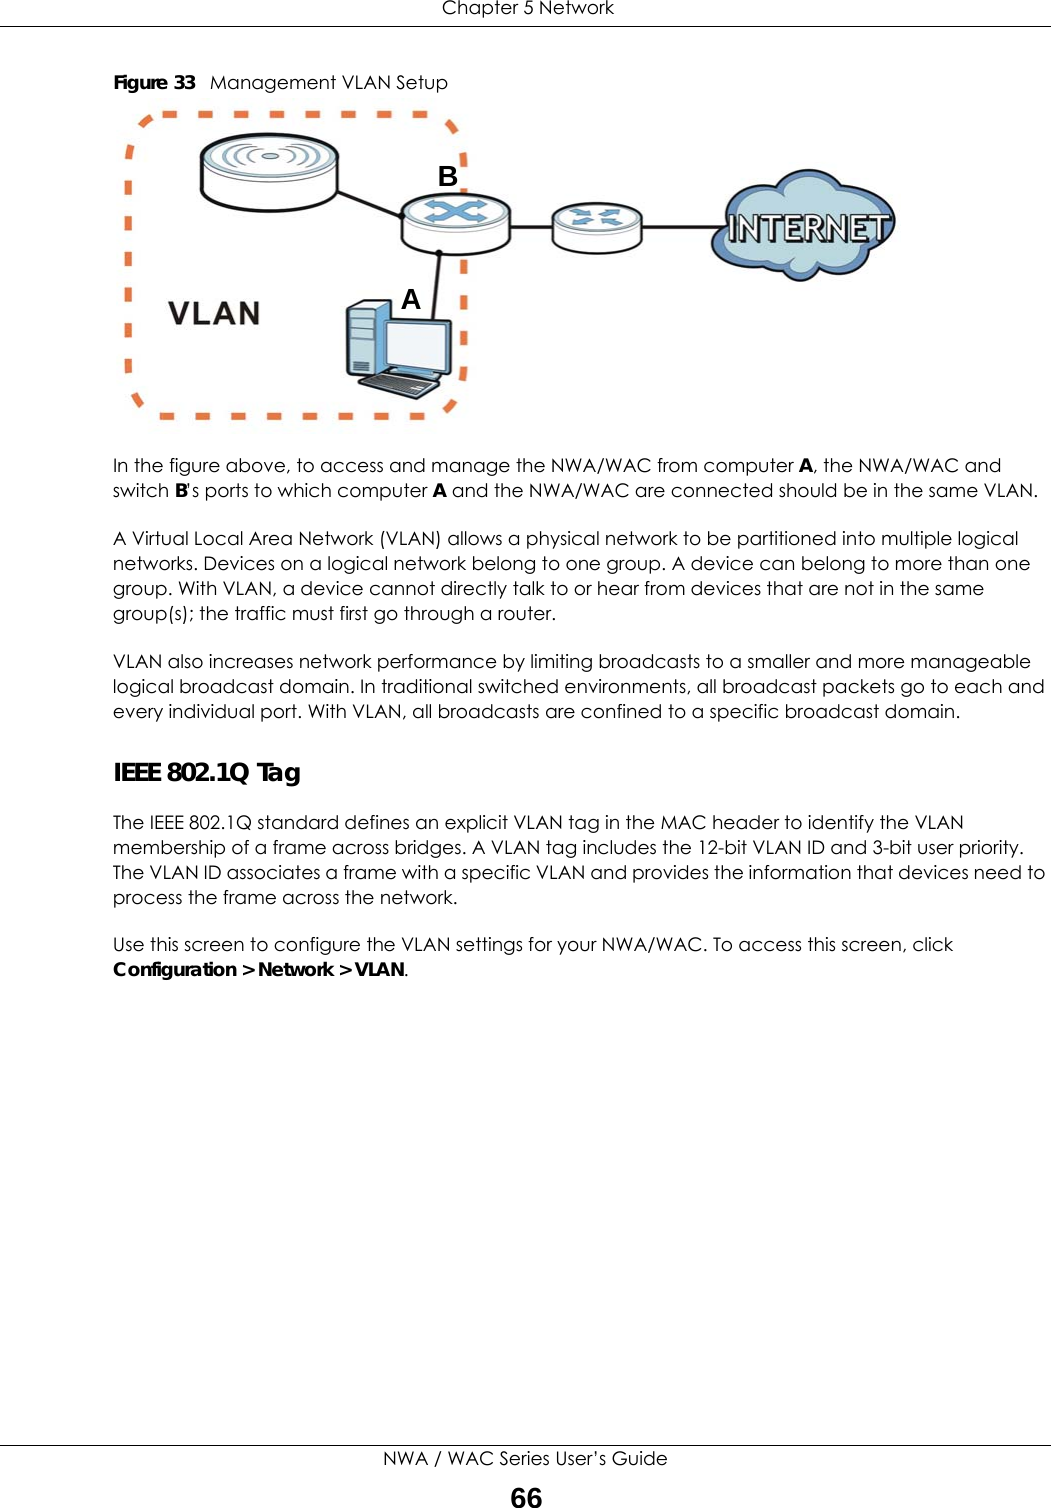  Chapter 5 NetworkNWA / WAC Series User’s Guide66Figure 33   Management VLAN SetupIn the figure above, to access and manage the NWA/WAC from computer A, the NWA/WAC and switch B’s ports to which computer A and the NWA/WAC are connected should be in the same VLAN.A Virtual Local Area Network (VLAN) allows a physical network to be partitioned into multiple logical networks. Devices on a logical network belong to one group. A device can belong to more than one group. With VLAN, a device cannot directly talk to or hear from devices that are not in the same group(s); the traffic must first go through a router.VLAN also increases network performance by limiting broadcasts to a smaller and more manageable logical broadcast domain. In traditional switched environments, all broadcast packets go to each and every individual port. With VLAN, all broadcasts are confined to a specific broadcast domain. IEEE 802.1Q TagThe IEEE 802.1Q standard defines an explicit VLAN tag in the MAC header to identify the VLAN membership of a frame across bridges. A VLAN tag includes the 12-bit VLAN ID and 3-bit user priority. The VLAN ID associates a frame with a specific VLAN and provides the information that devices need to process the frame across the network. Use this screen to configure the VLAN settings for your NWA/WAC. To access this screen, click Configuration &gt; Network &gt; VLAN.AB